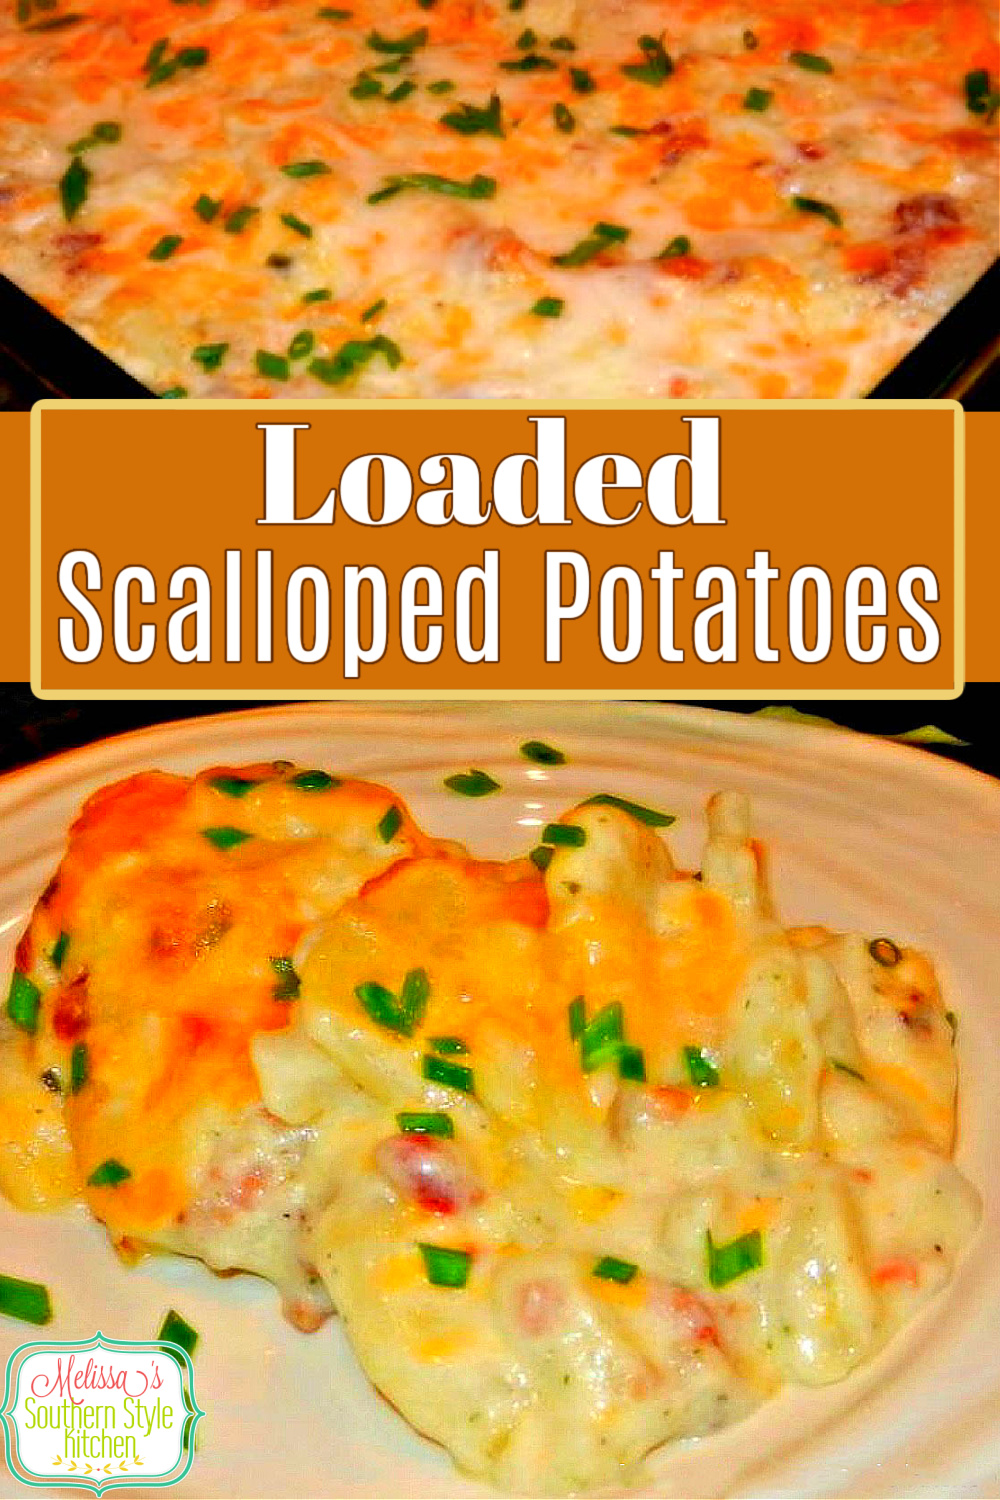 This side dish goes with a myriad of entrees and it's loaded with bacon, chives and plenty of gooey cheese! #loadedscallopedpotatoes #potatoecasserole #scallopedpotatoes #potatorecipes #sidedishrecipes #bacon #casseroles #dinner #dinnerrecipes #southernfood #southernrecipes via @melissasssk